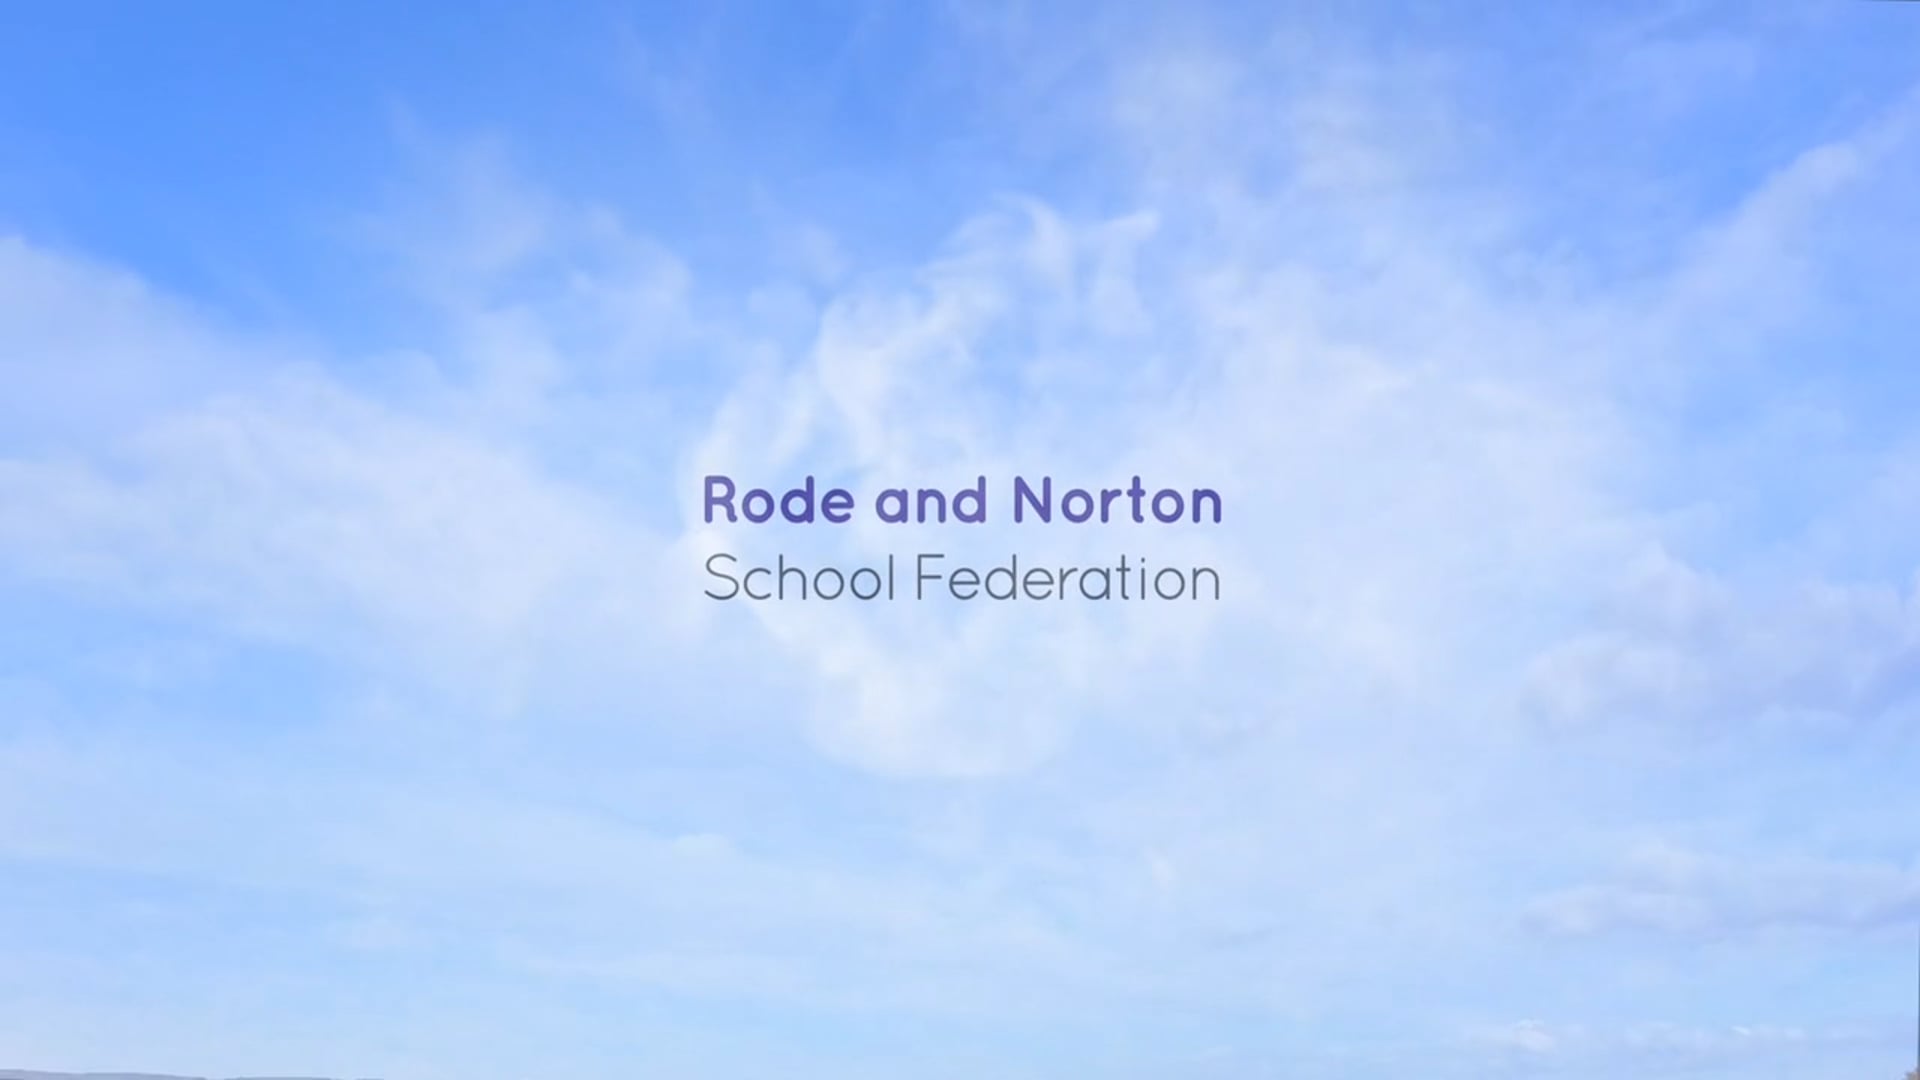 Rode and Norton School Federation Open Day Film 2020